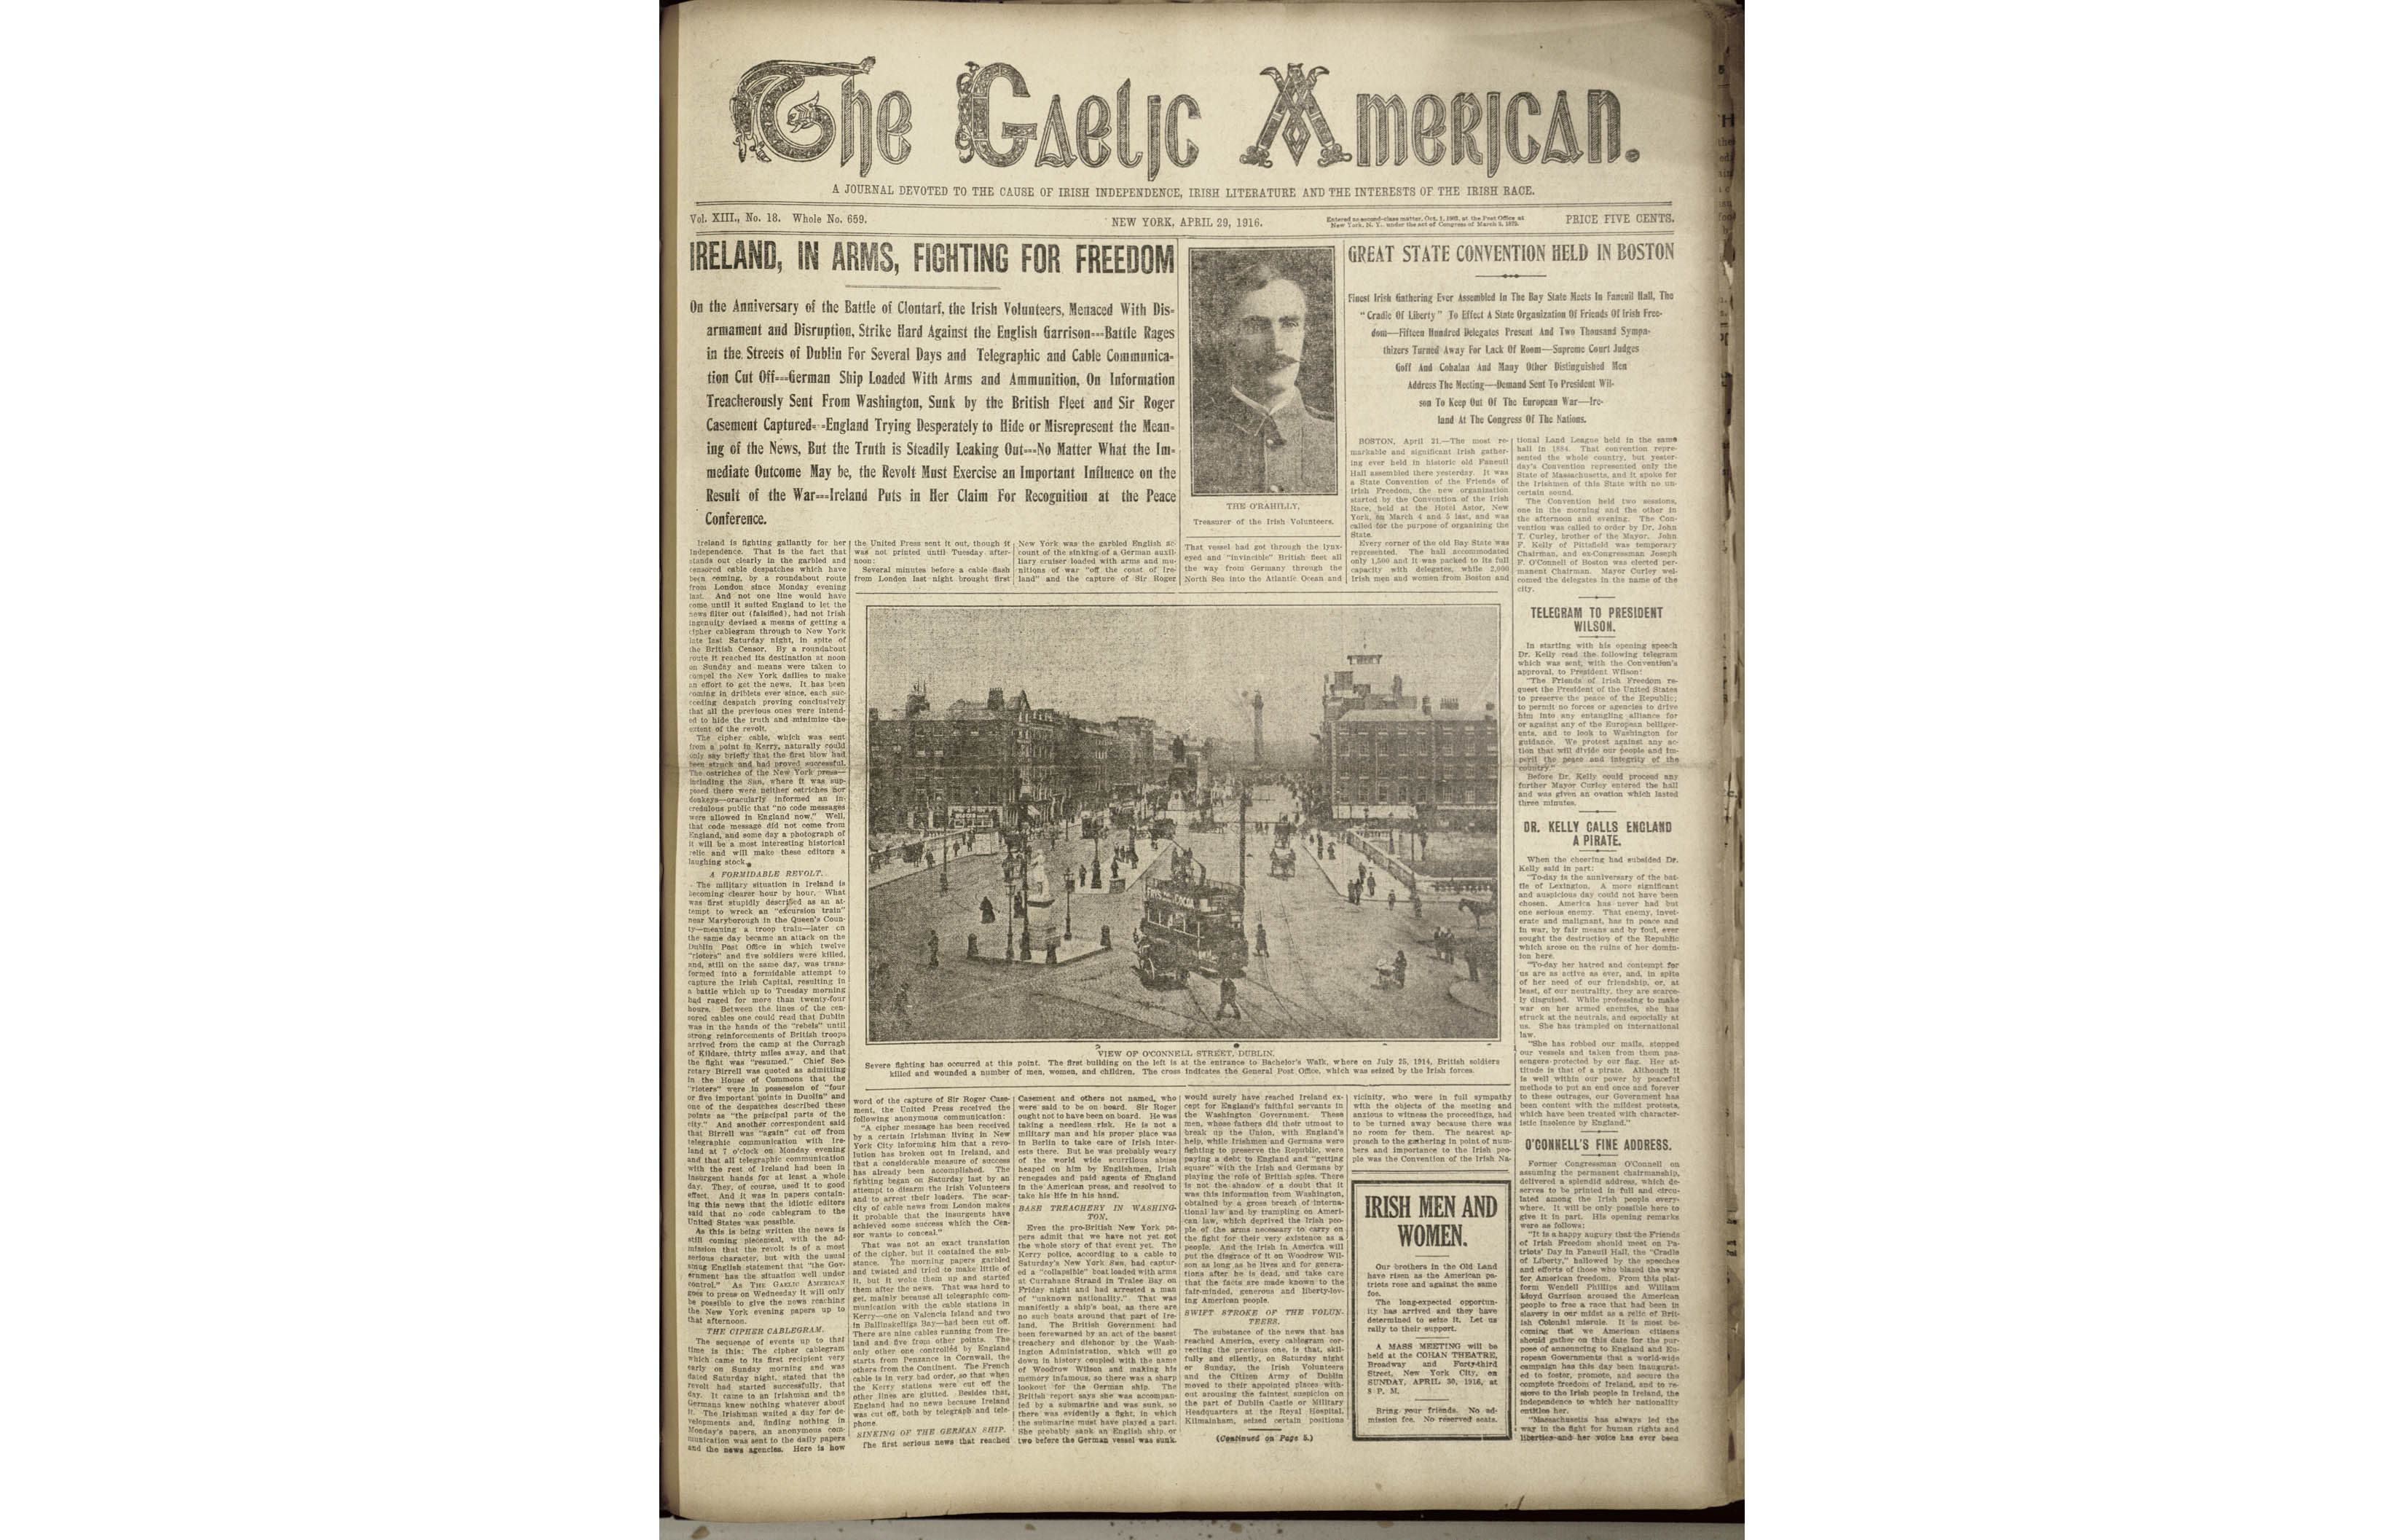 The front page of The Gaelic American which was edited and published by John Devoy.